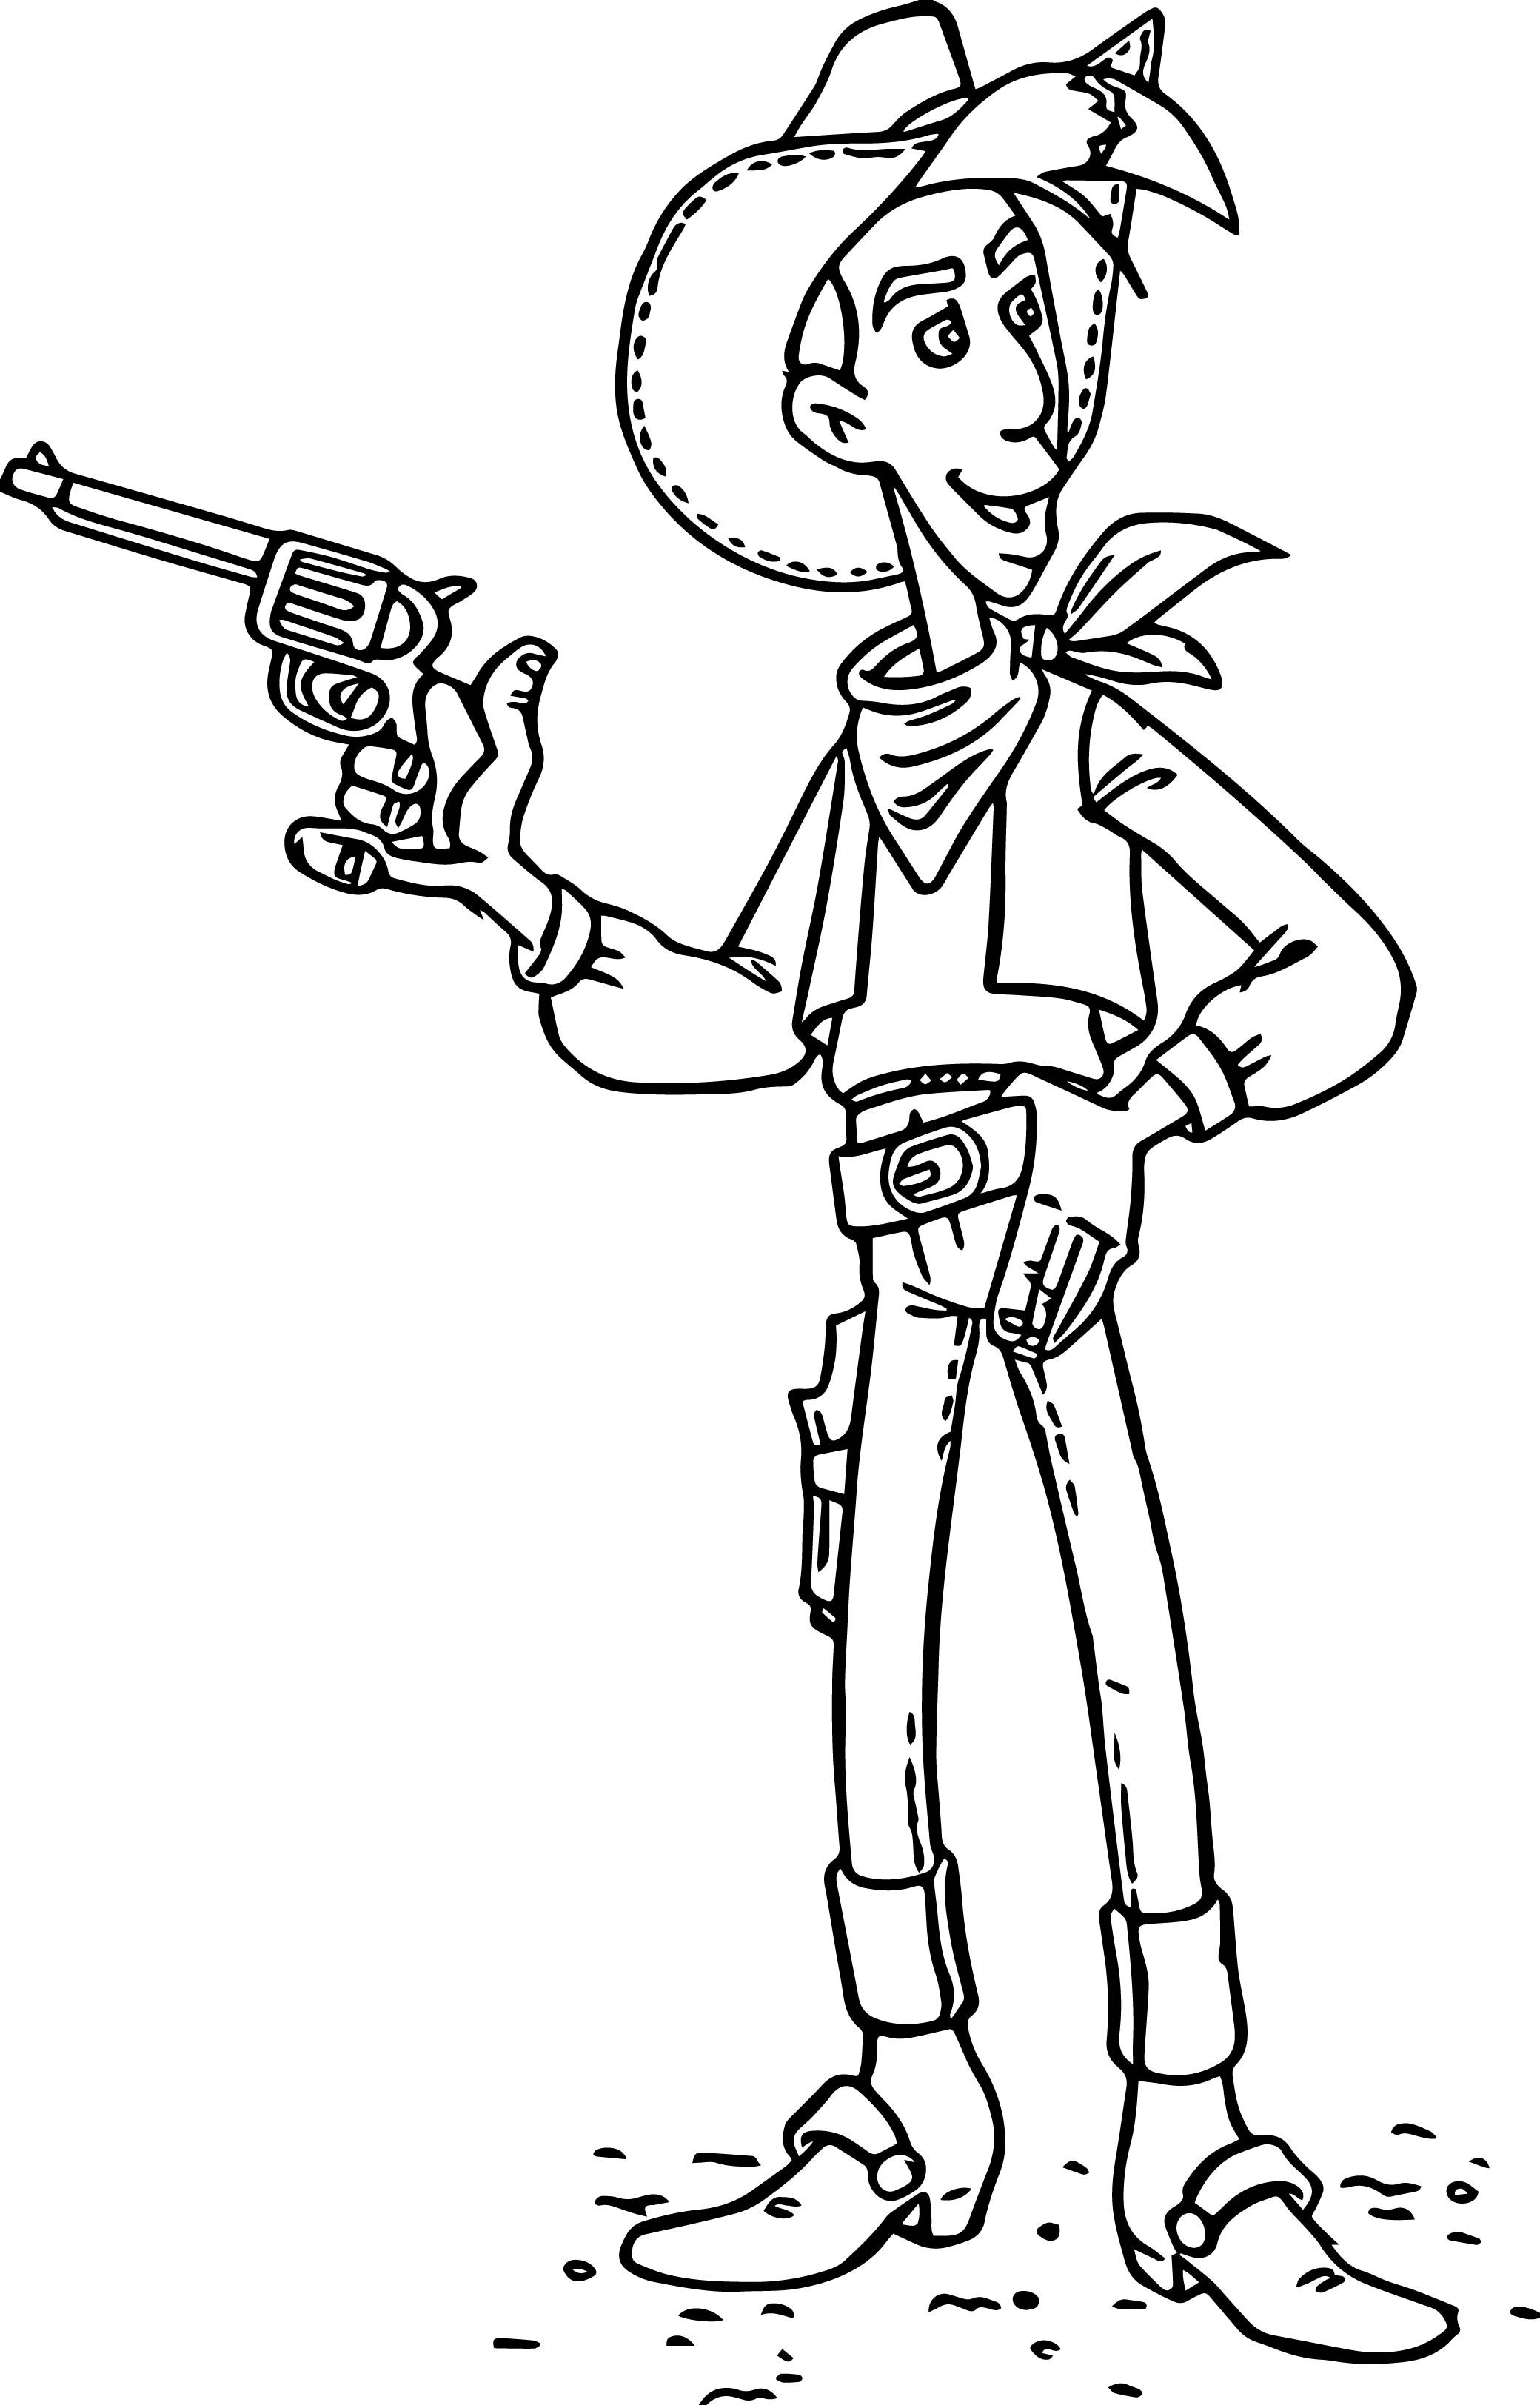 lucky-luke-coloring-page-0001-q1